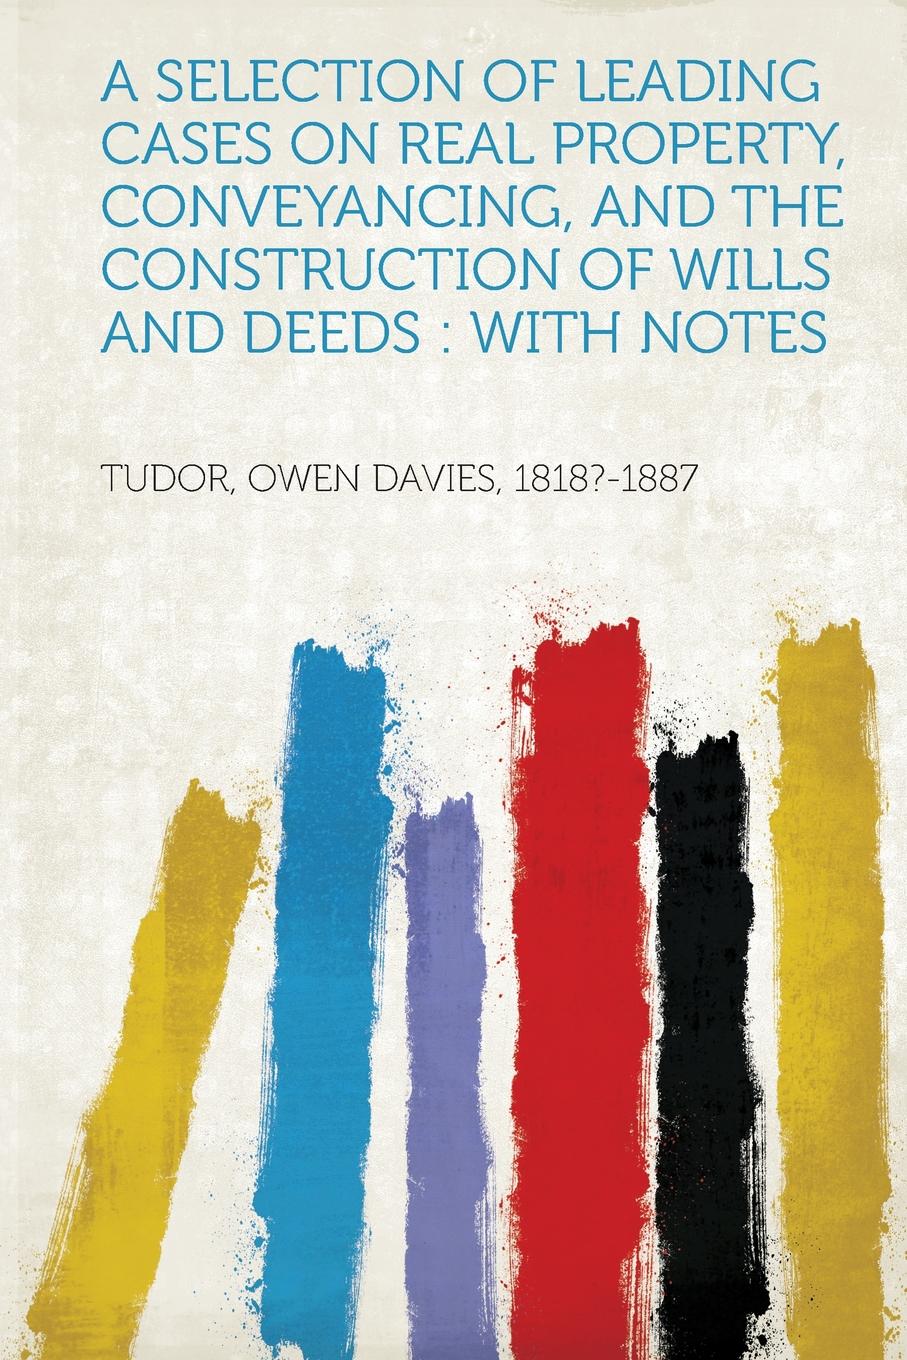 A Selection of Leading Cases on Real Property, Conveyancing, and the Construction of Wills and Deeds. With Notes